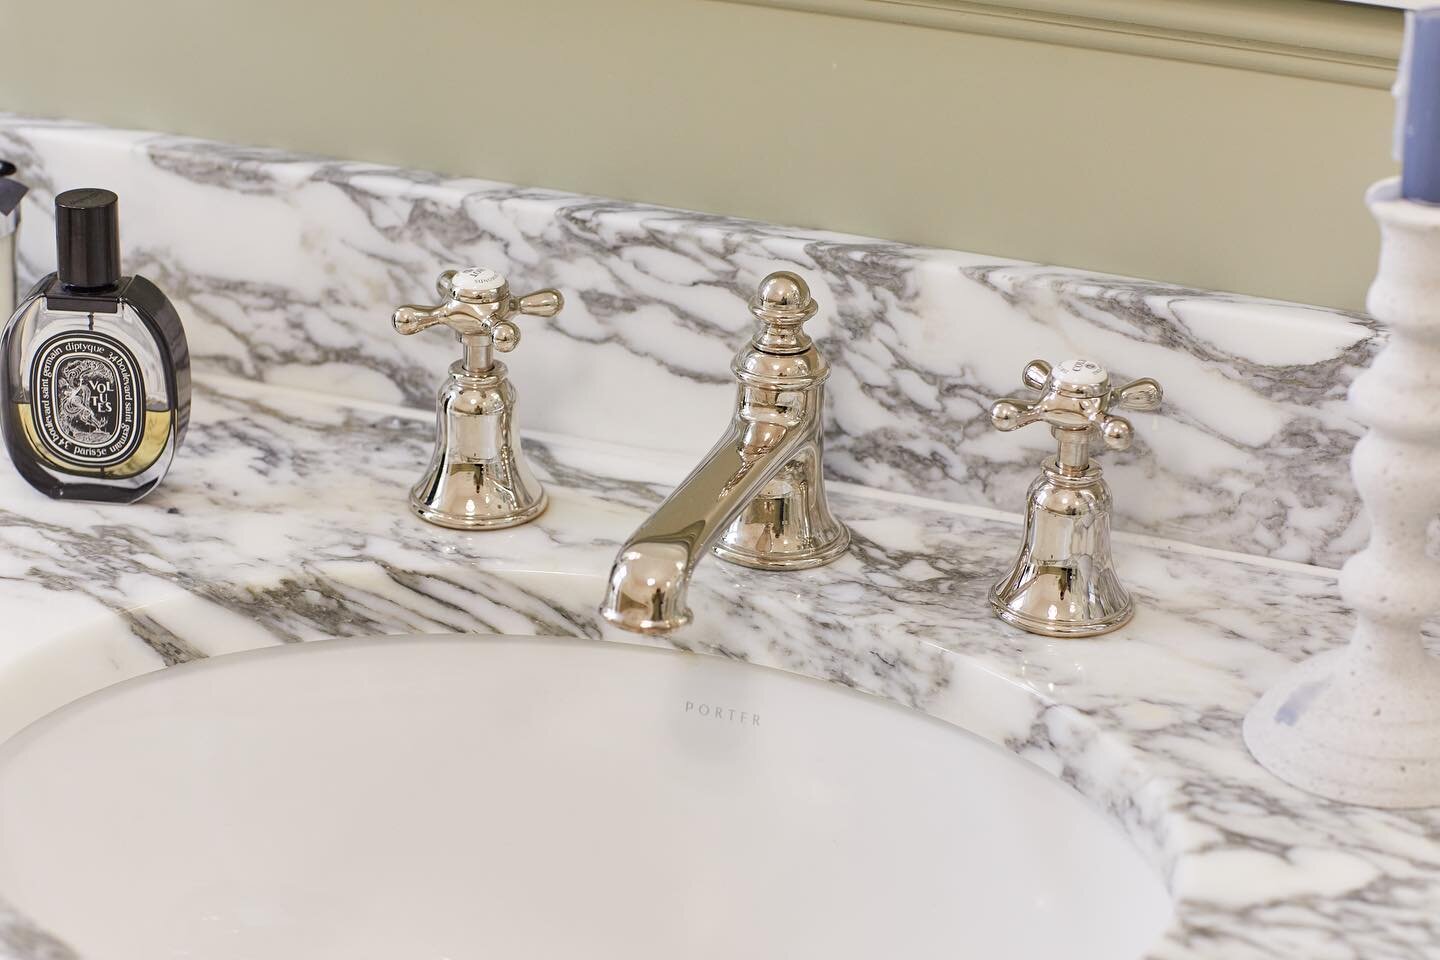 &bull; 𝐓𝐡𝐞 𝐅𝐢𝐧𝐞𝐬𝐭 𝐁𝐫𝐚𝐬𝐬𝐰𝐚𝐫𝐞

The @Drummonds_Bathrooms Mull Classic 3 Hole Basin Mixer compliments any vanity suite, as seen in our most recent project alongside a polished Arabescato marble top.

Designed and installed by @BracoDesi